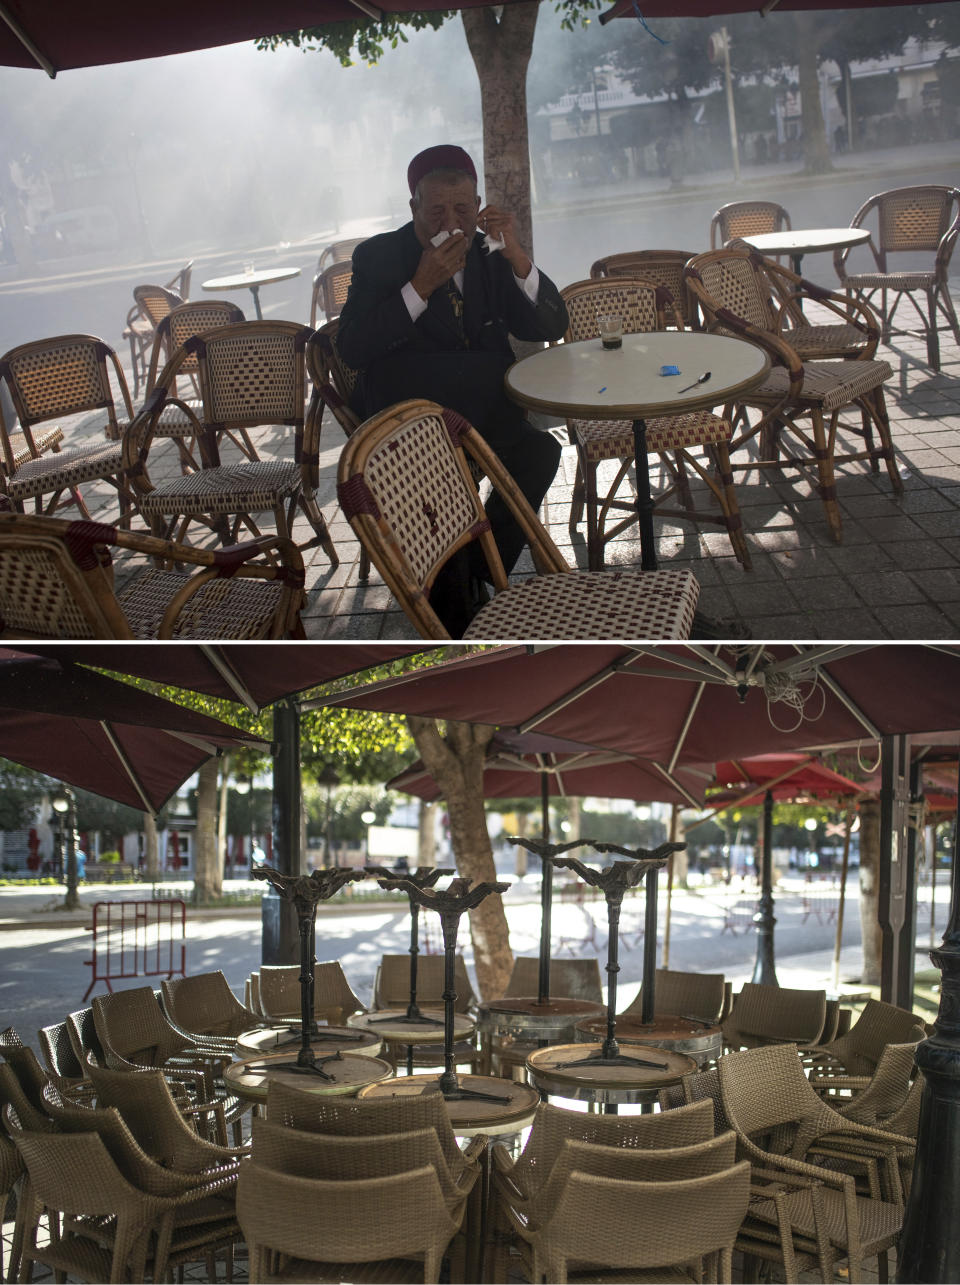 A combo image showing a man trying to breathe through a cloth as teargas during a demonstration against former Tunisian President Zine El Abidine Ben Ali in the center of Tunis, Monday, Jan. 17. 2011 top, and empty chairs and tables packed outside a close street cafe in Tunis' landmark Avenue Habib Bourgiba, where massive protests took place in 2011, on the tenth anniversary of the uprising, during to a national lockdown after a surge in Covid-19 cases, in Tunis, Thursday, Jan. 14, 2021. Tunisia is commemorating the 10th anniversary since the flight into exile of its iron-fisted leader, Zine El Abidine Ben Ali, pushed from power in a popular revolt that foreshadowed the so-called Arab Spring. But there will be no festive celebrations Thursday marking the revolution in this North African nation, ordered into lockdown to contain the coronavirus. (AP Photo/Thibault Camus, Mosa'ab Elshamy)